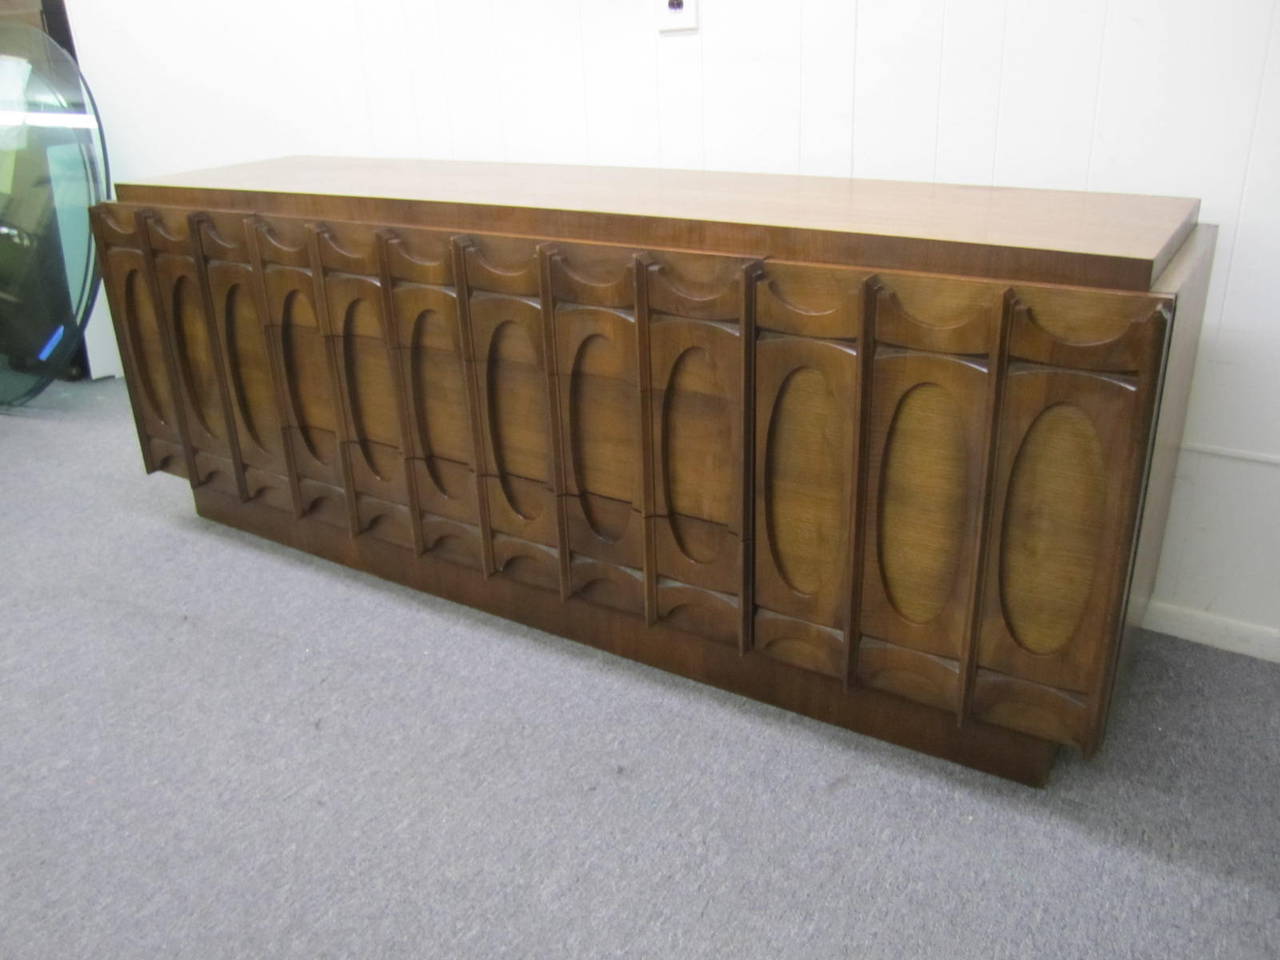 Fantastic Paul Evans inspired Brutalist walnut credenza. Wonderfully carved walnut doors and drawers create a chunky Brutalist look. The doors on either end open to reveal a bank of drawers. Deeper drawers line the center-so there is tons of storage